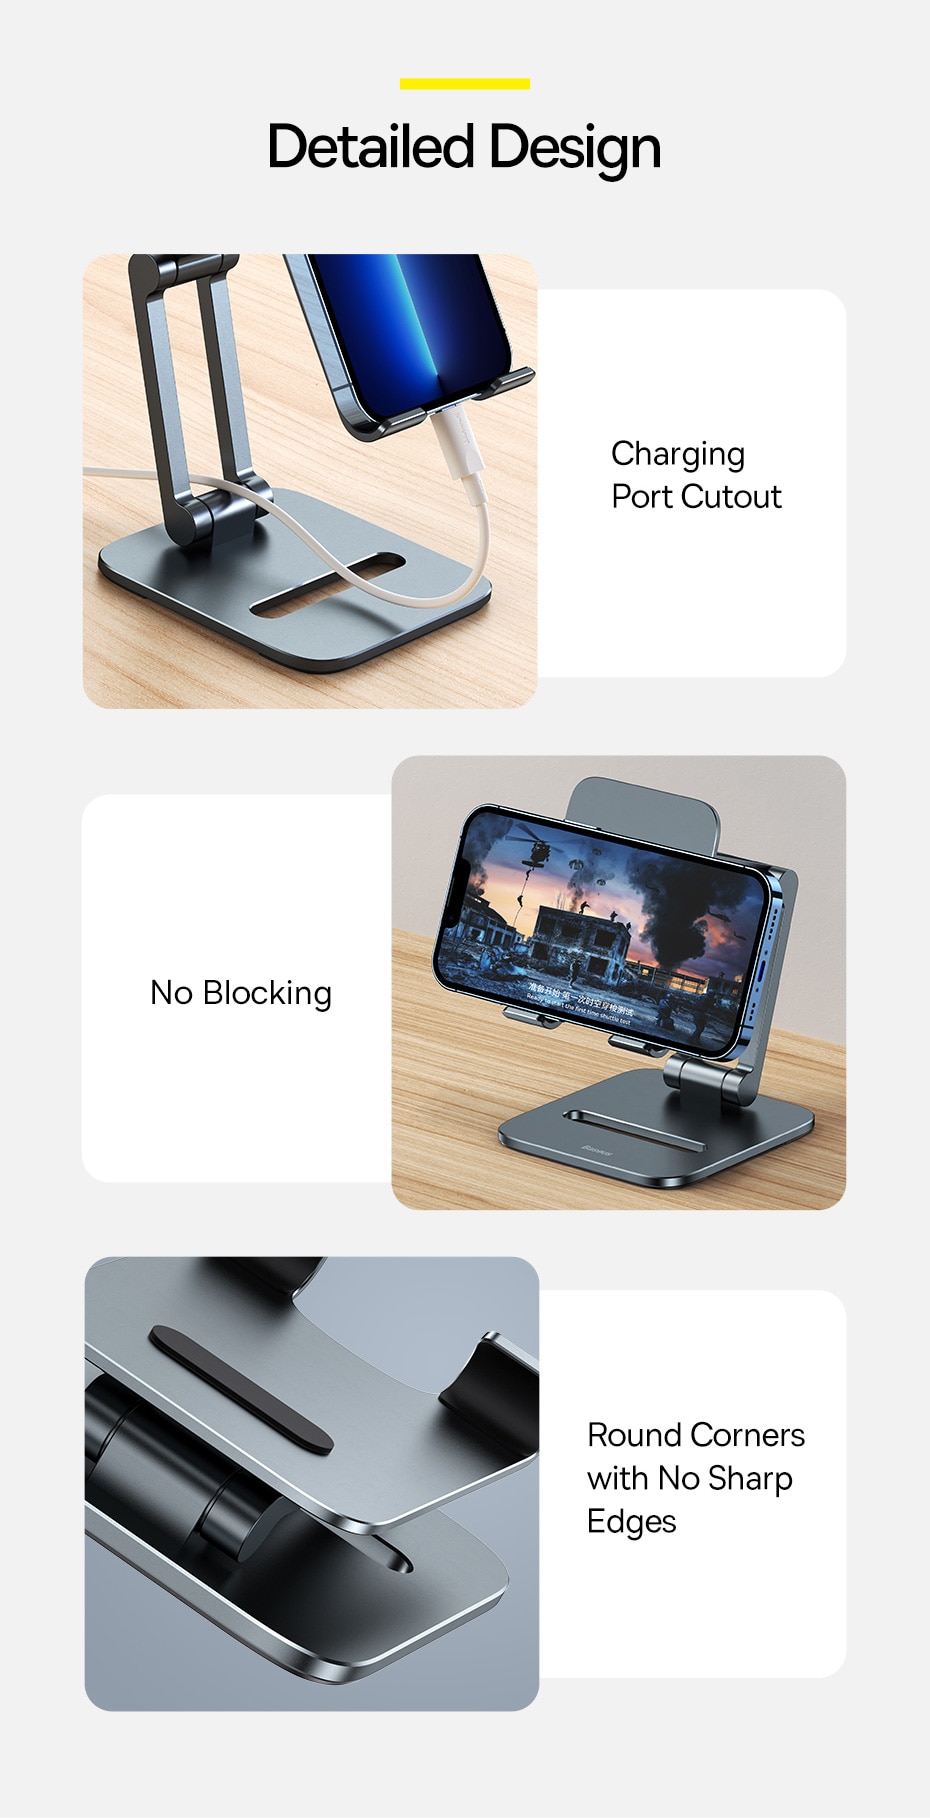 Baseus Phone Holder Desk Mobile Phone Stand Foldable Metal Tablet Holder Support For iPhone 13 12 iPad Pro Air Universal Holder